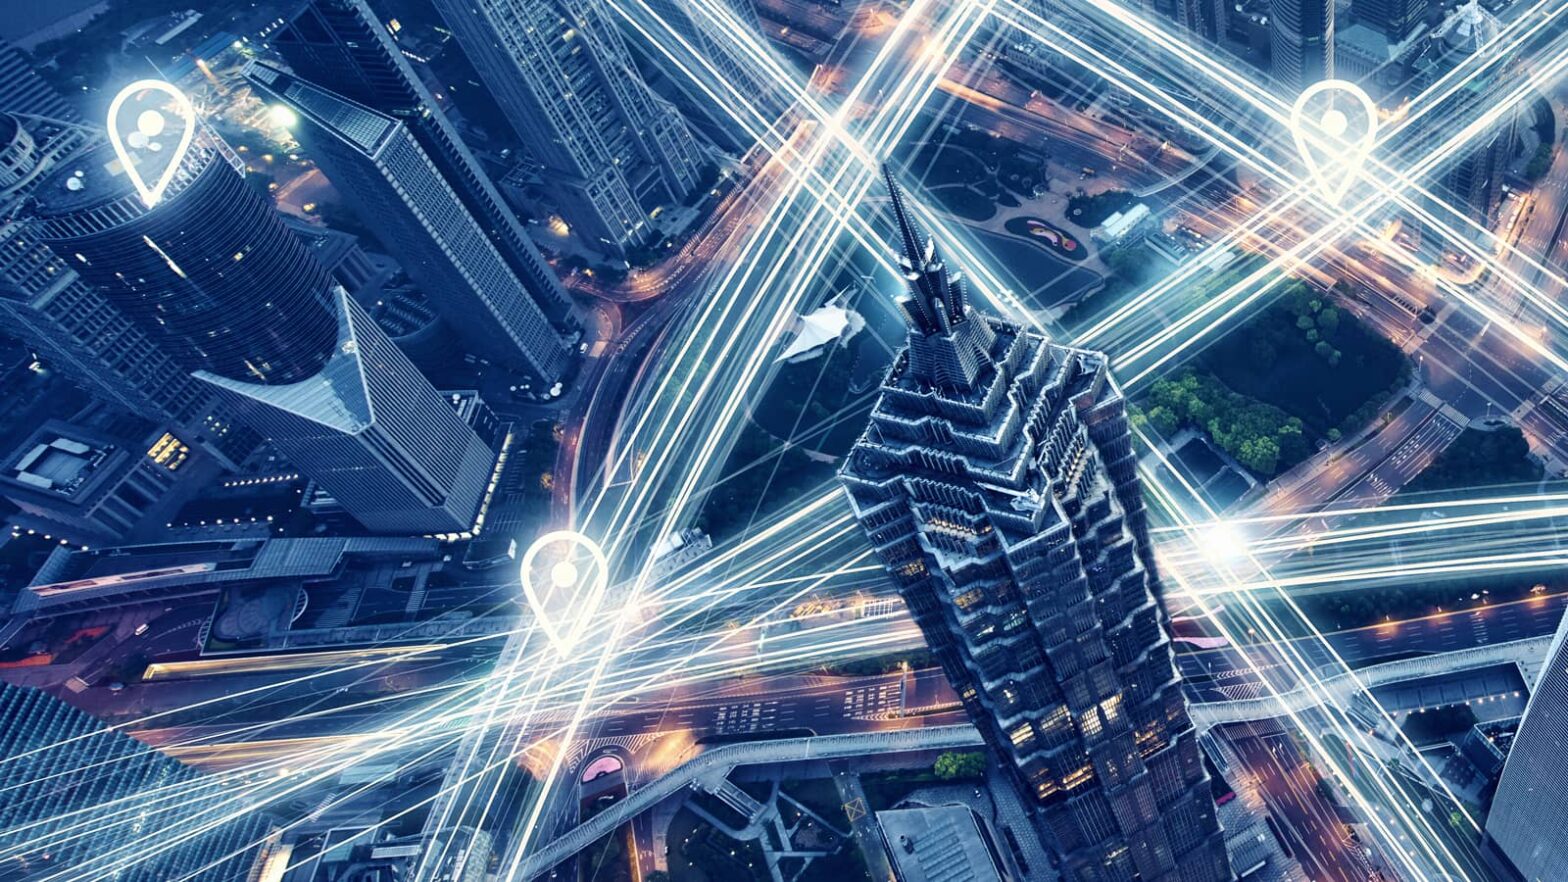 Stock art of city and illustration of broadband connections envisioned as light